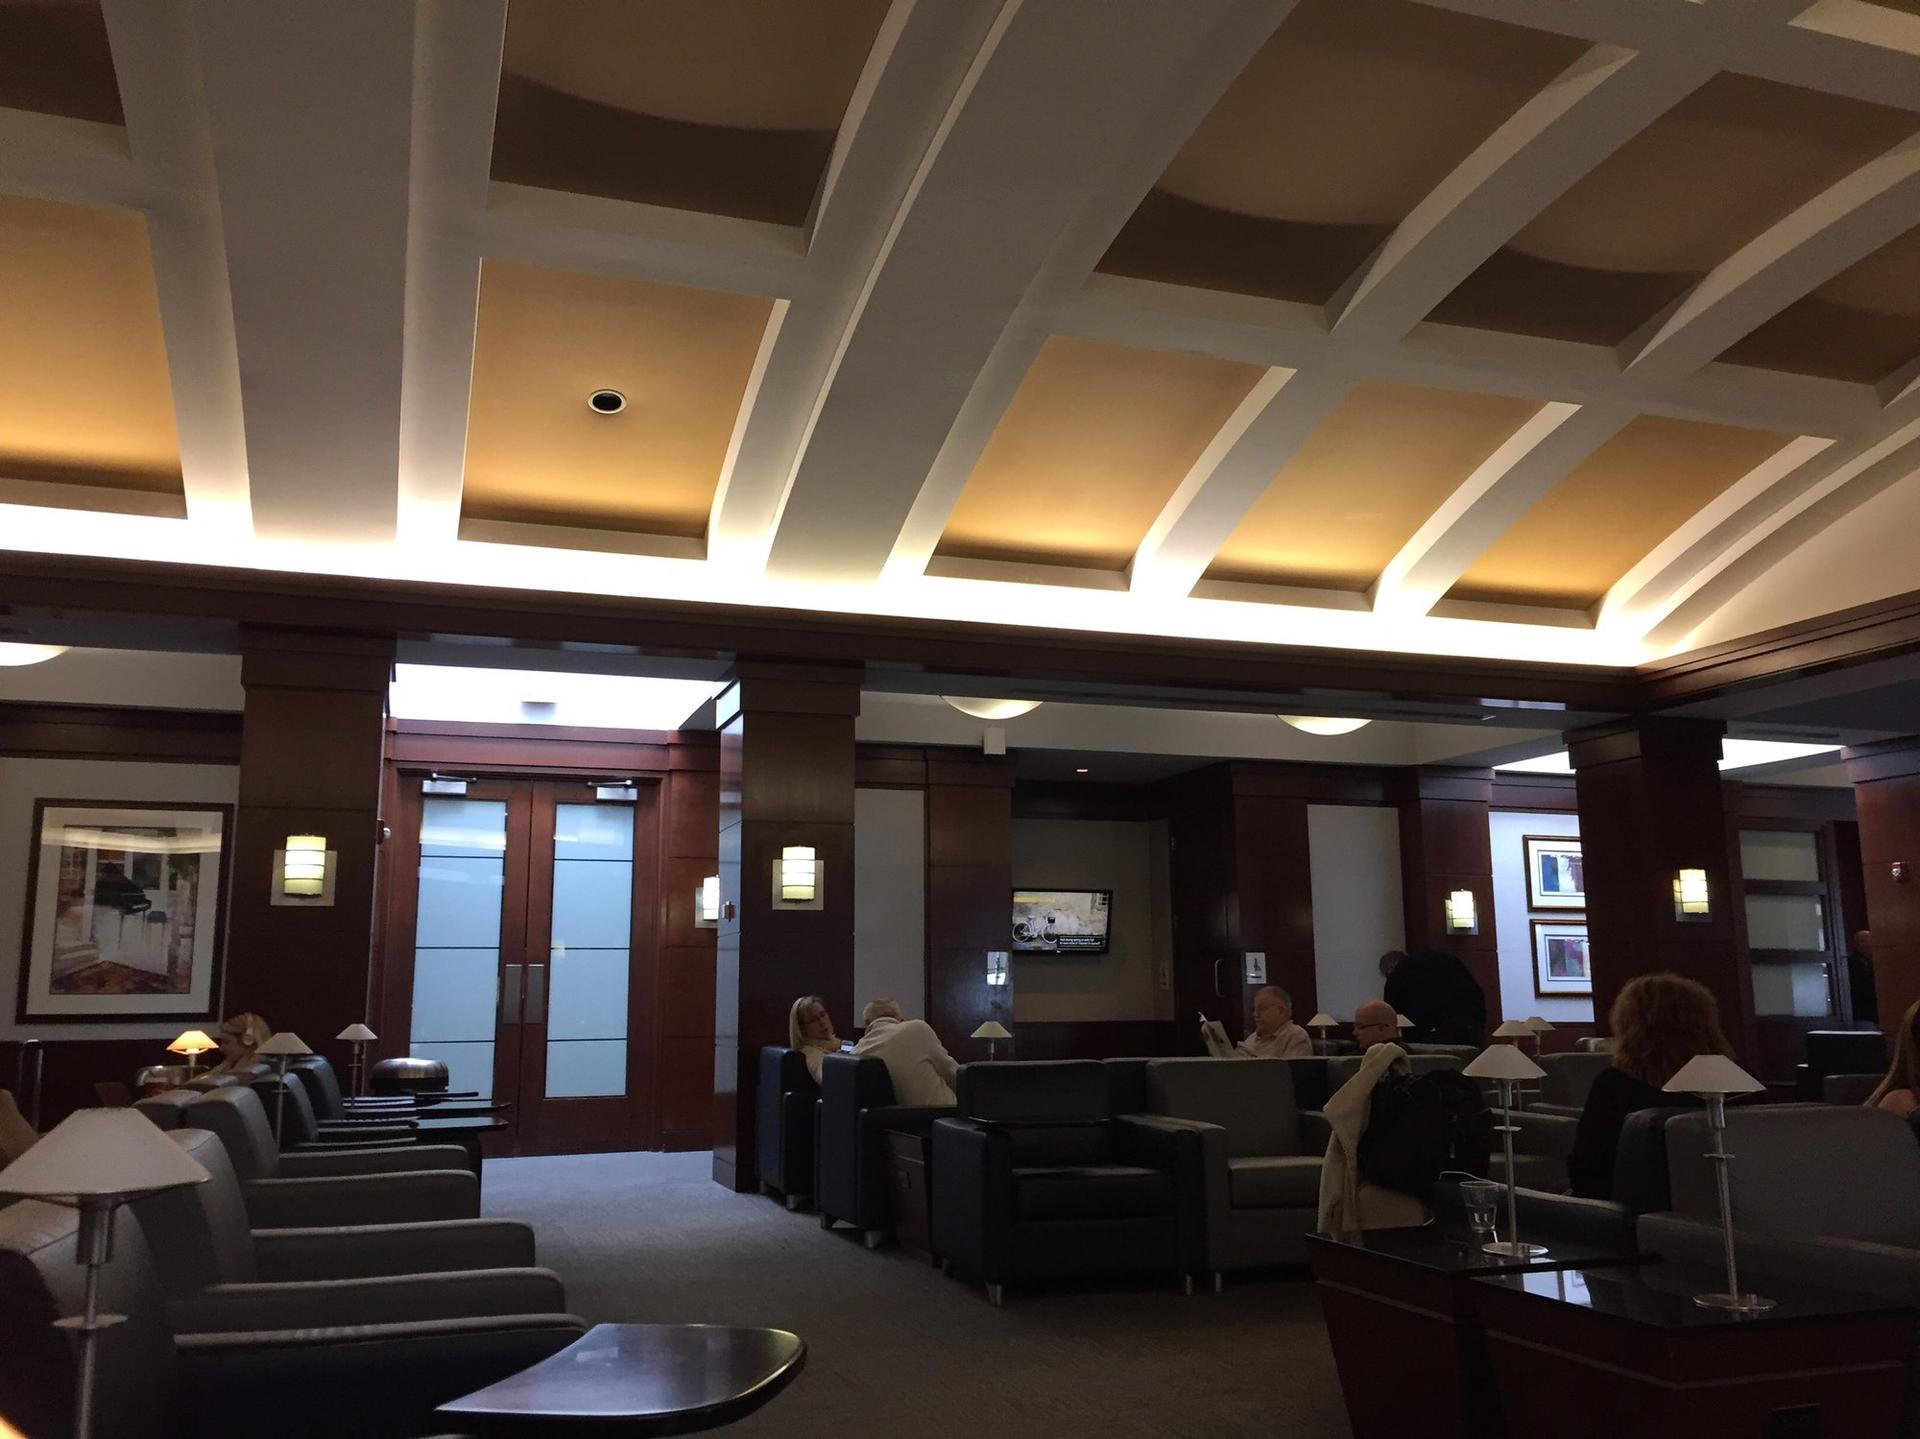 American Airlines Admirals Club image 31 of 37